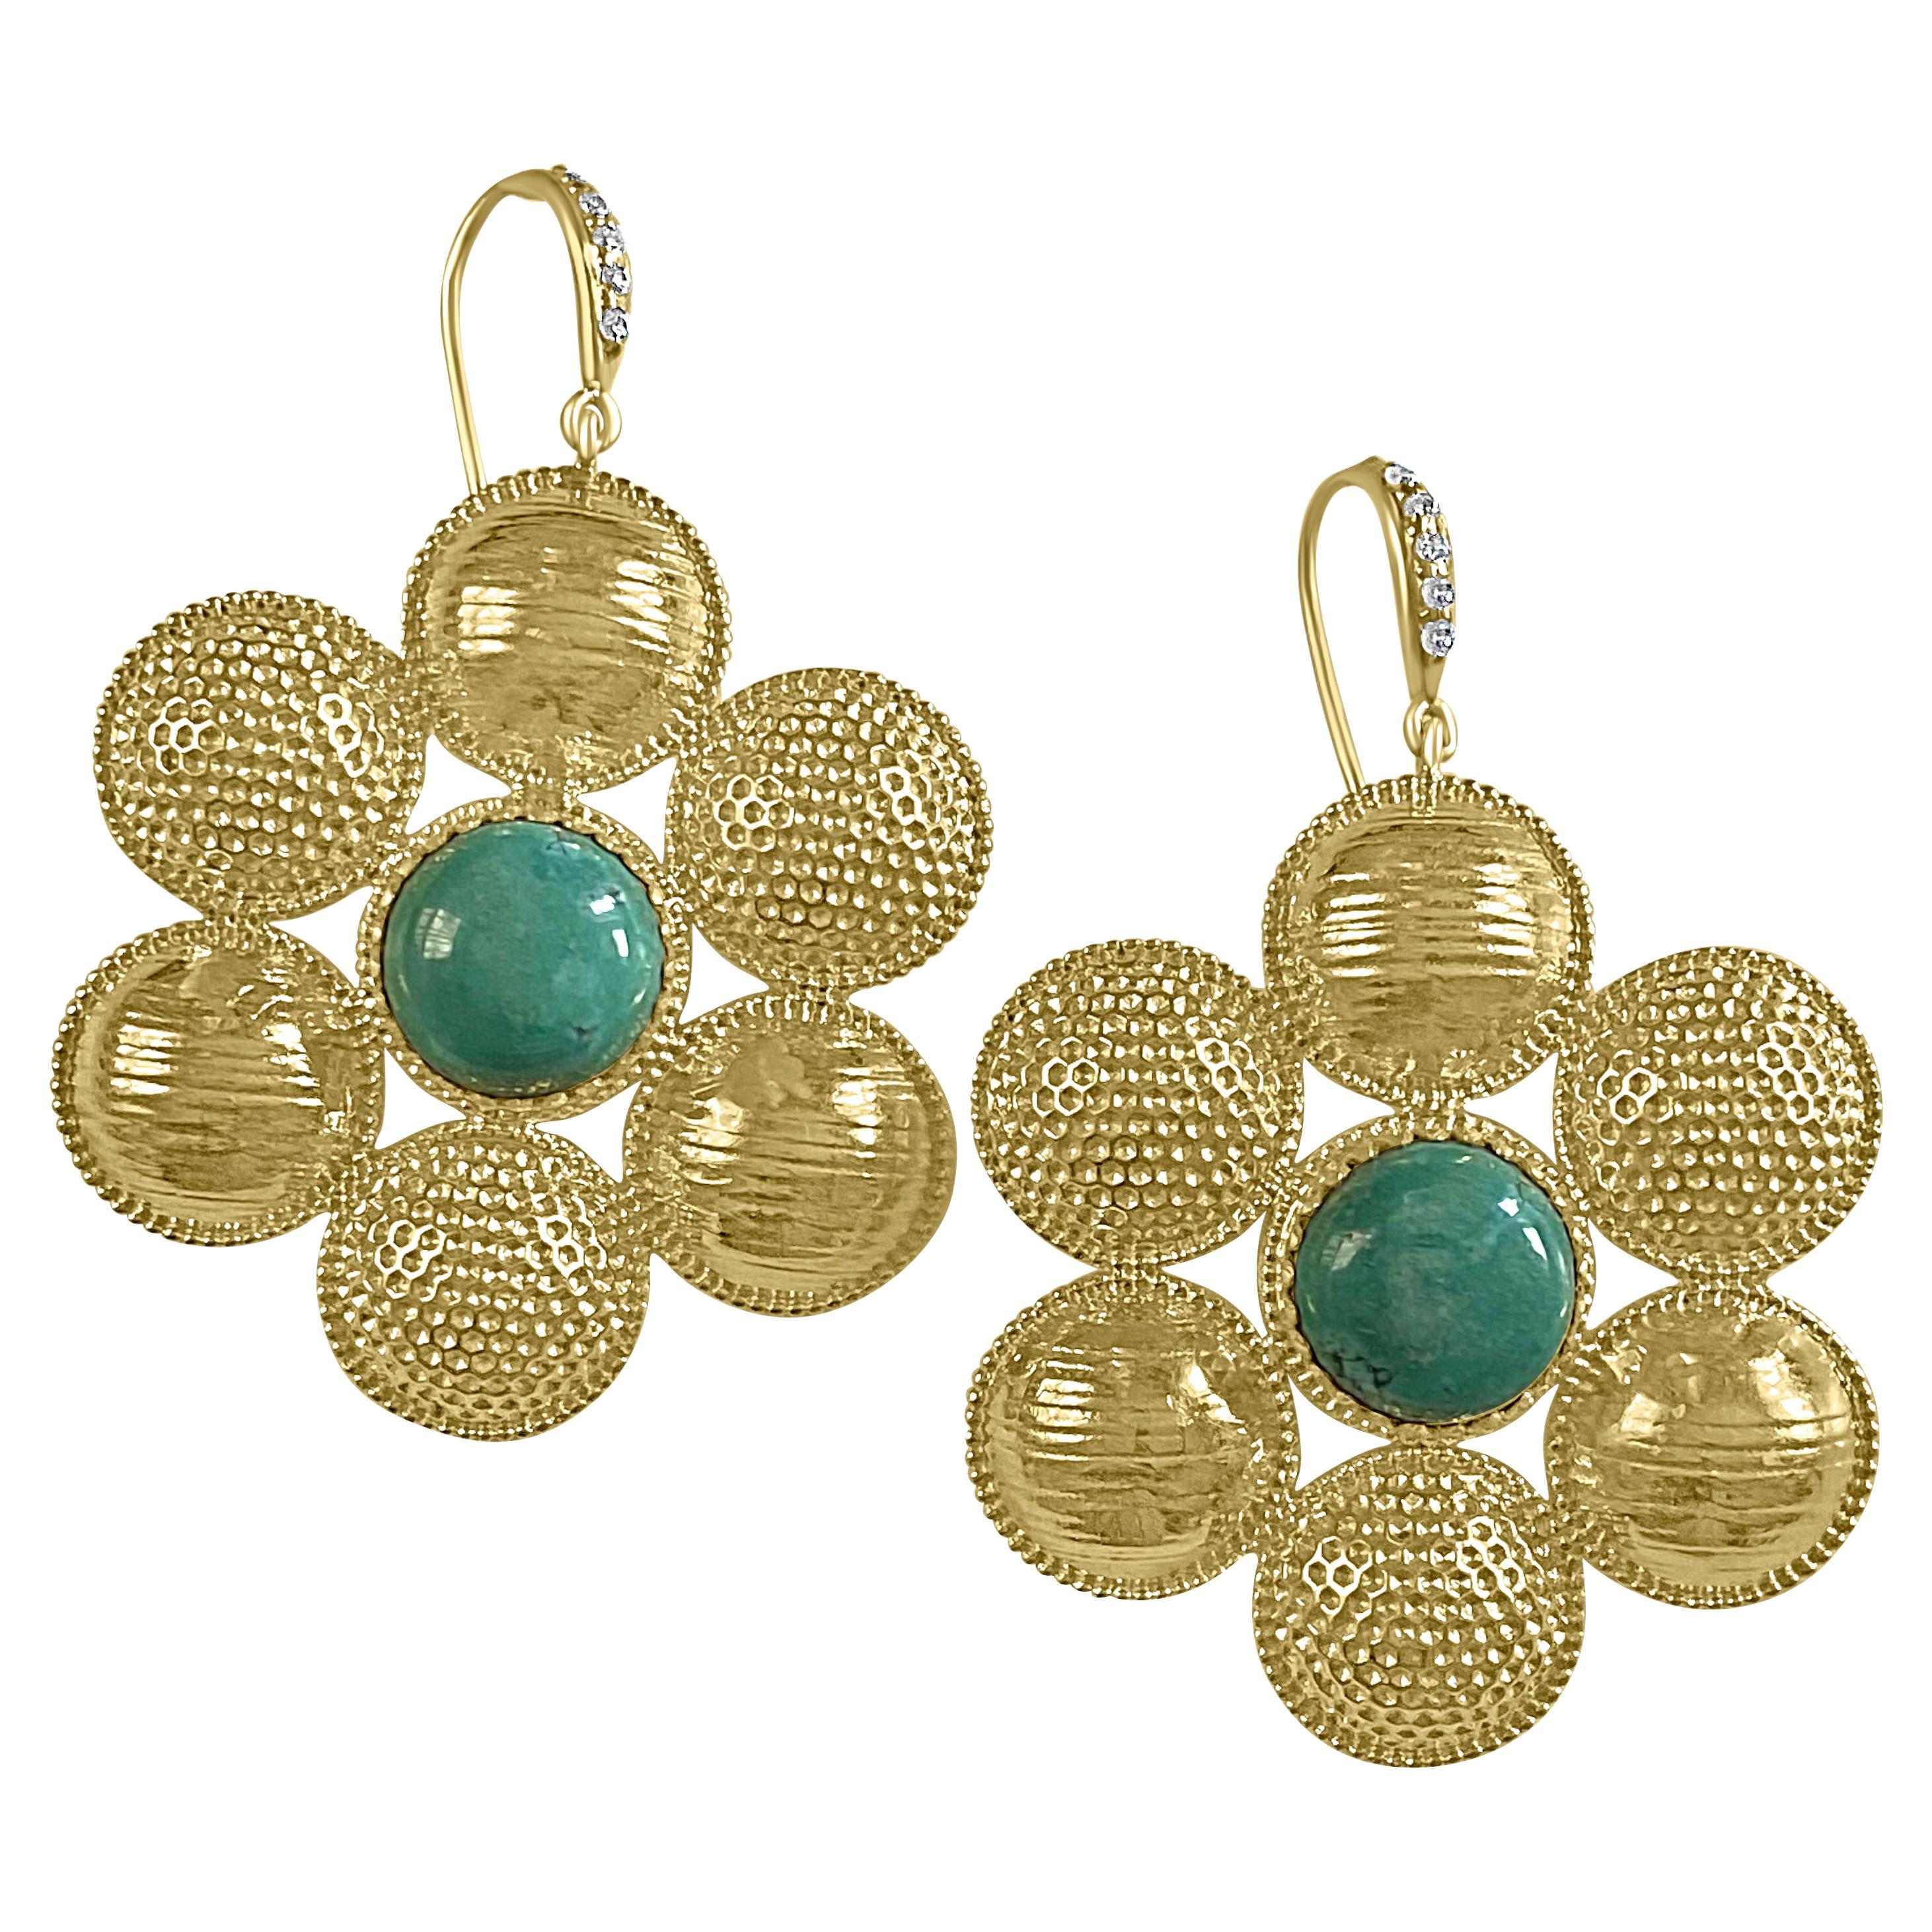 Twin Elegance Turquoise Circle Cluster Statement Earrings For Sale